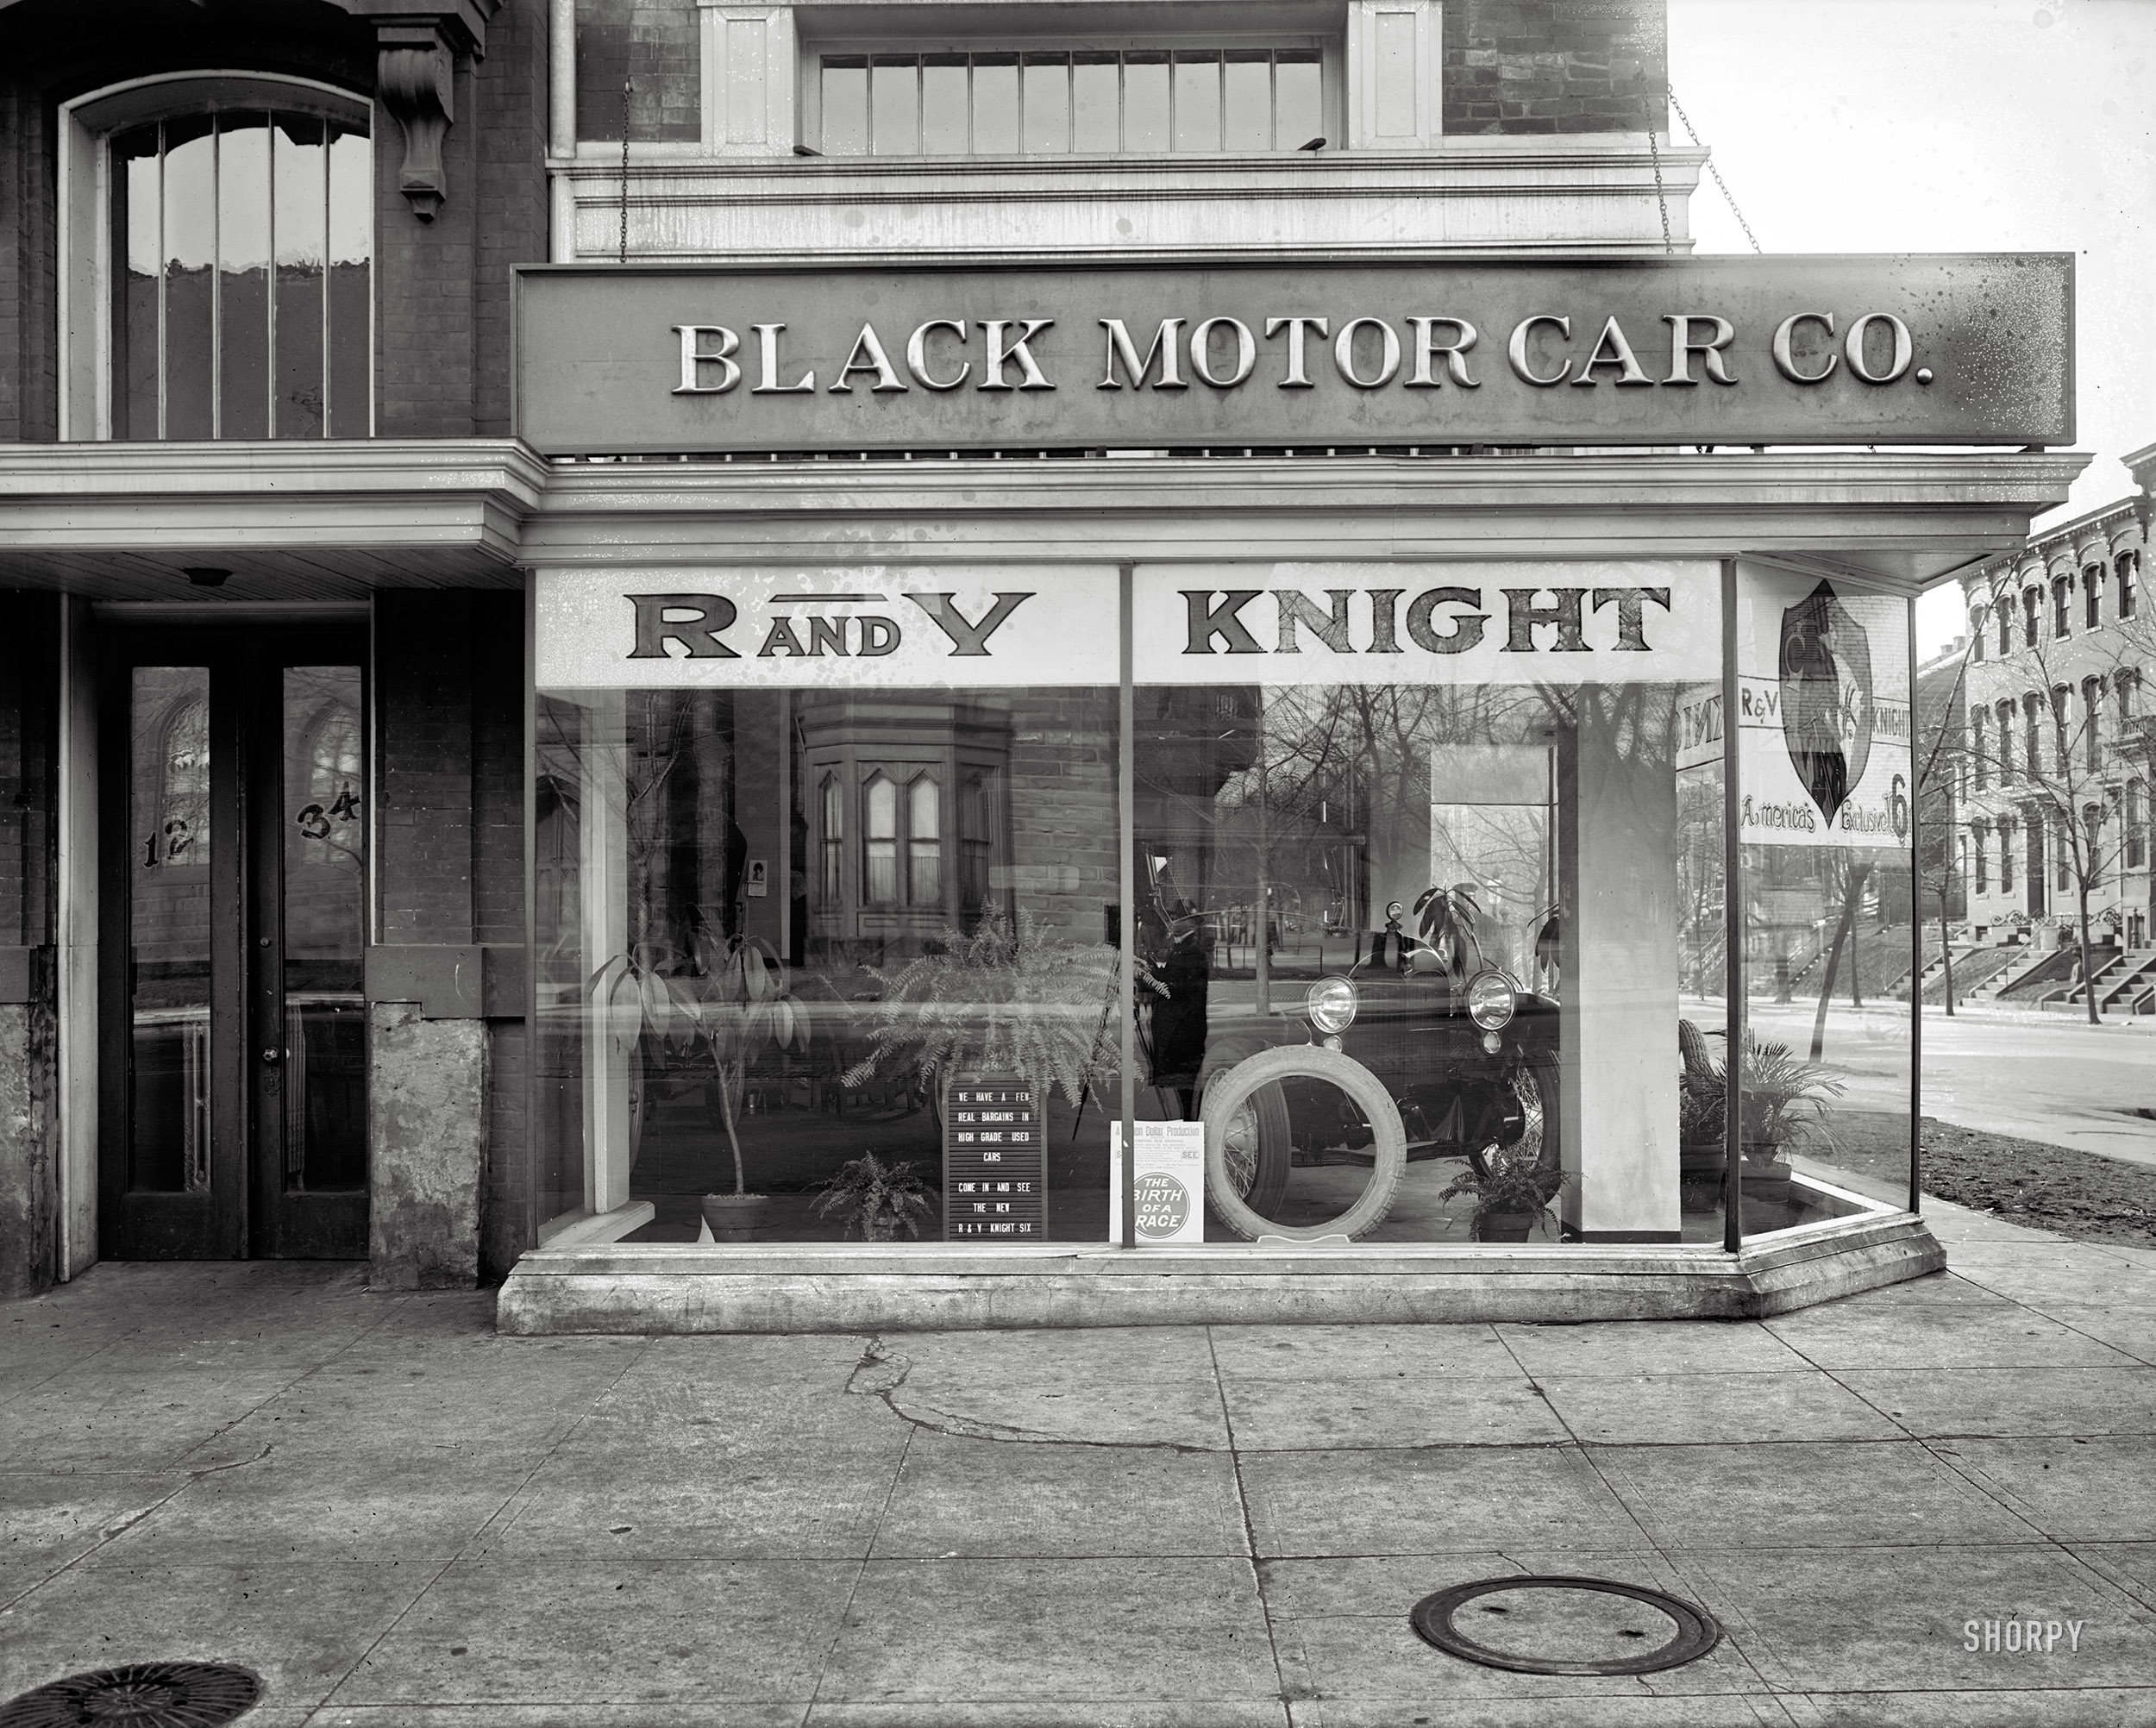 Washington, D.C., circa 1920. "Black Motor Car Co., 14th Street N.W." We see you there. National Photo Company Collection glass negative. View full size.